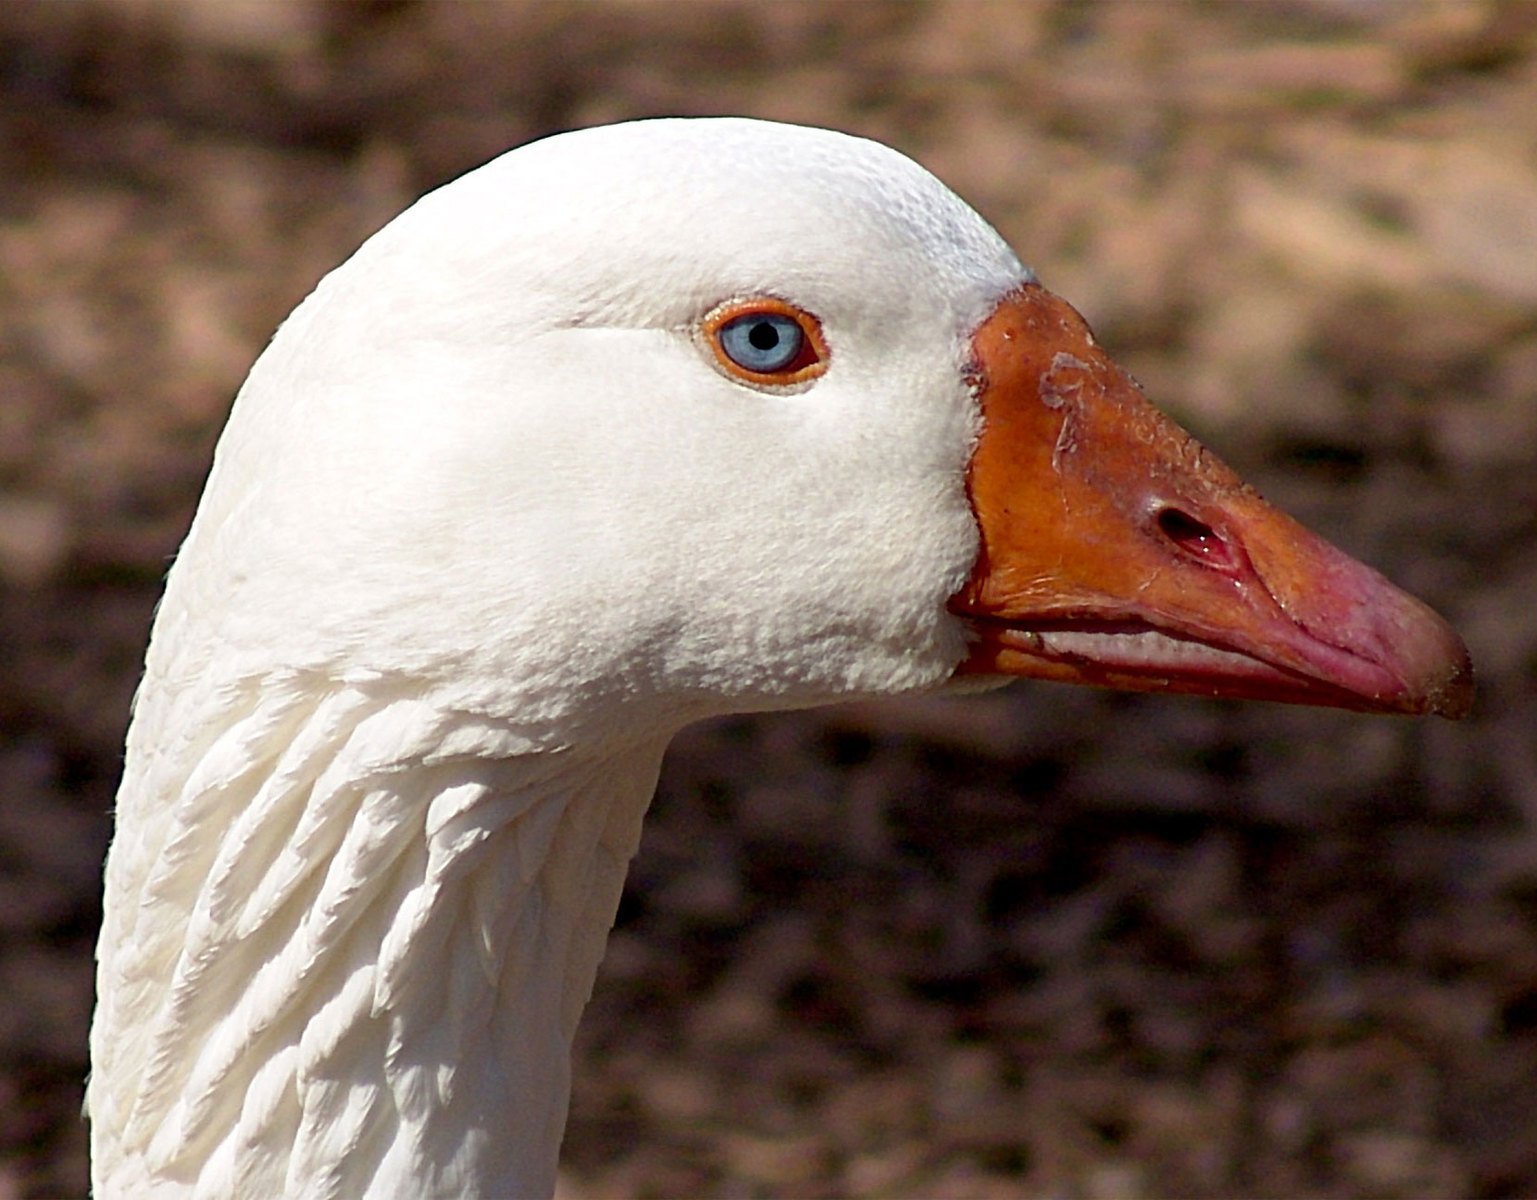 the goose is close to the camera with an interesting look